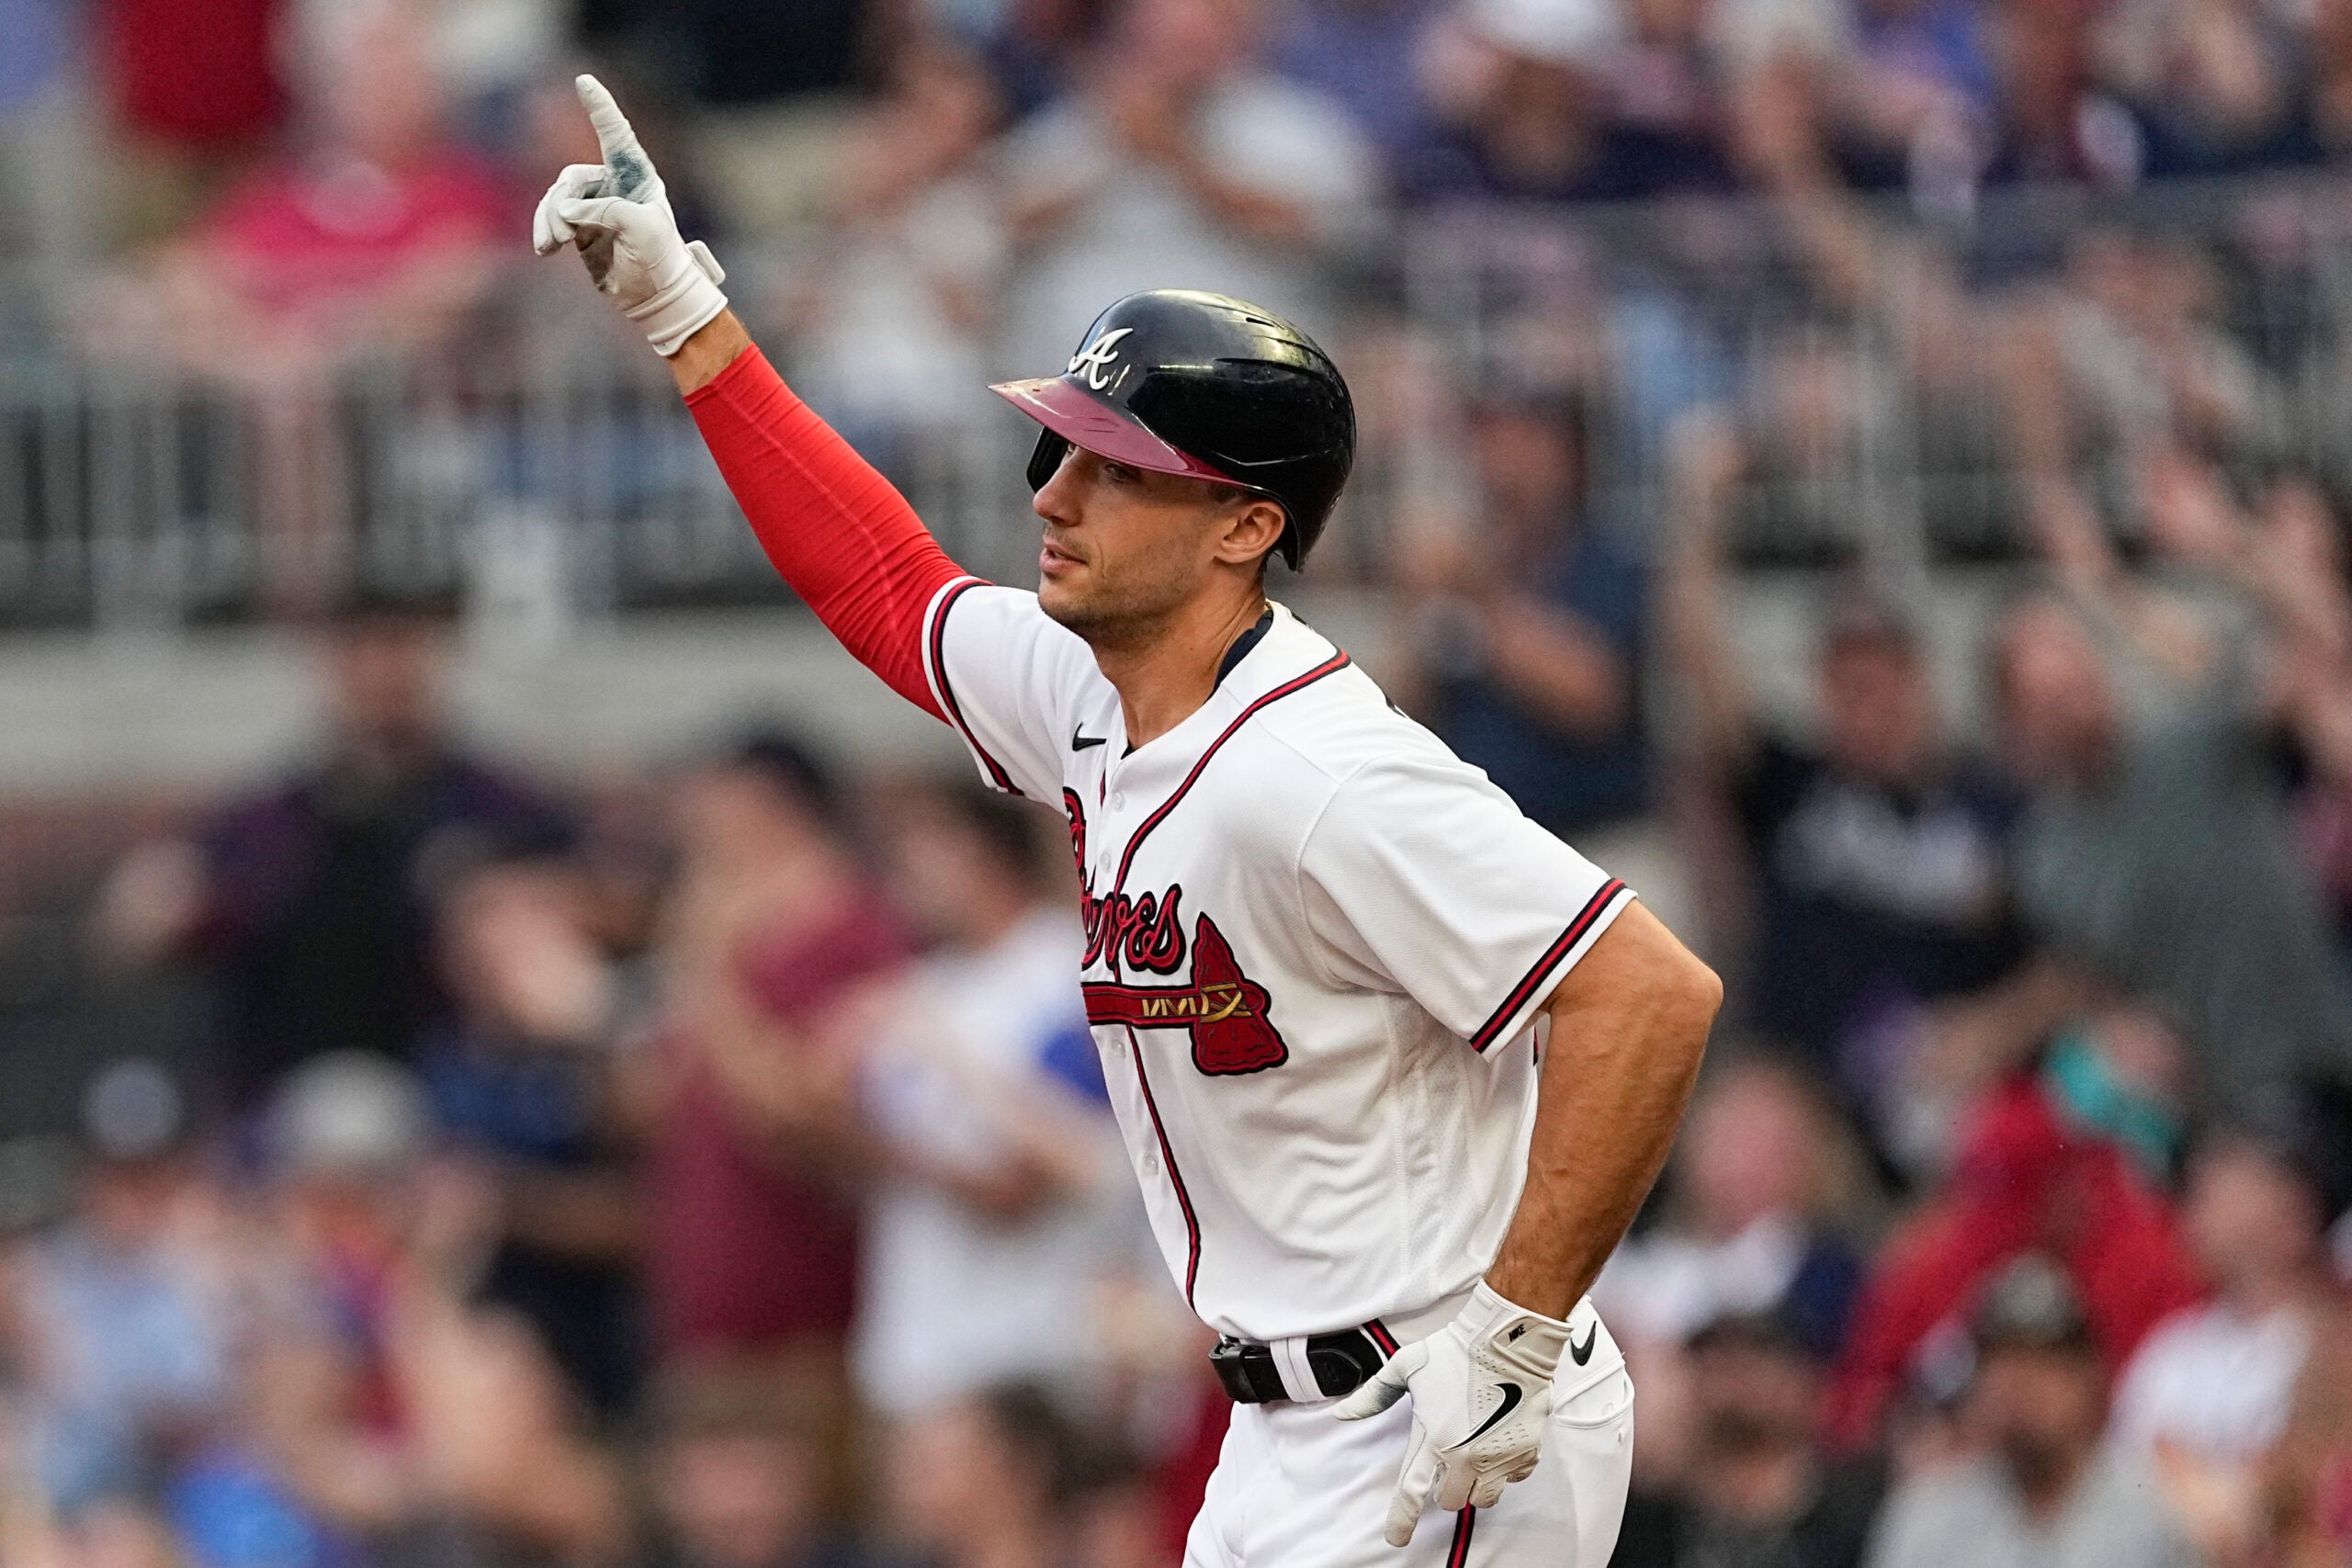 Braves first baseman Matt Olson gestures as he rounds the bases after hitting a home run in the first inning.